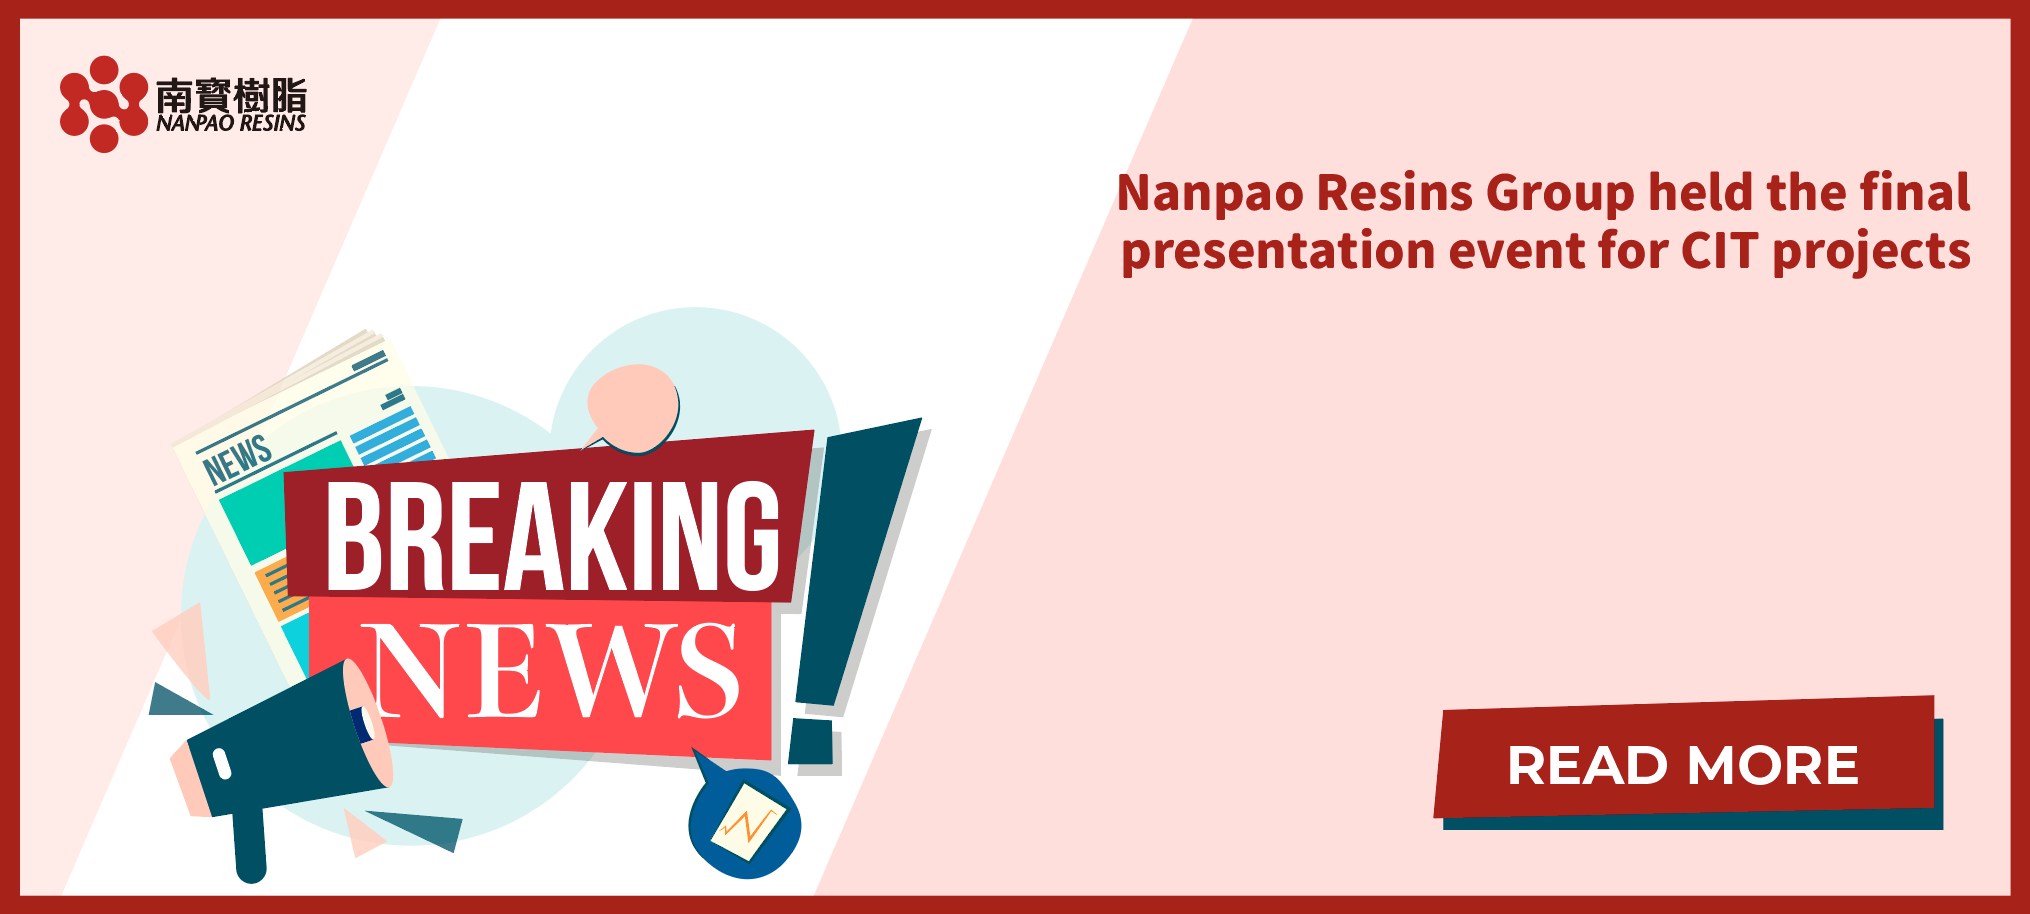 On November 9, 2023, the Taiwan headquarters of Nanpao Resins Group held the final presentation event for CIT projects